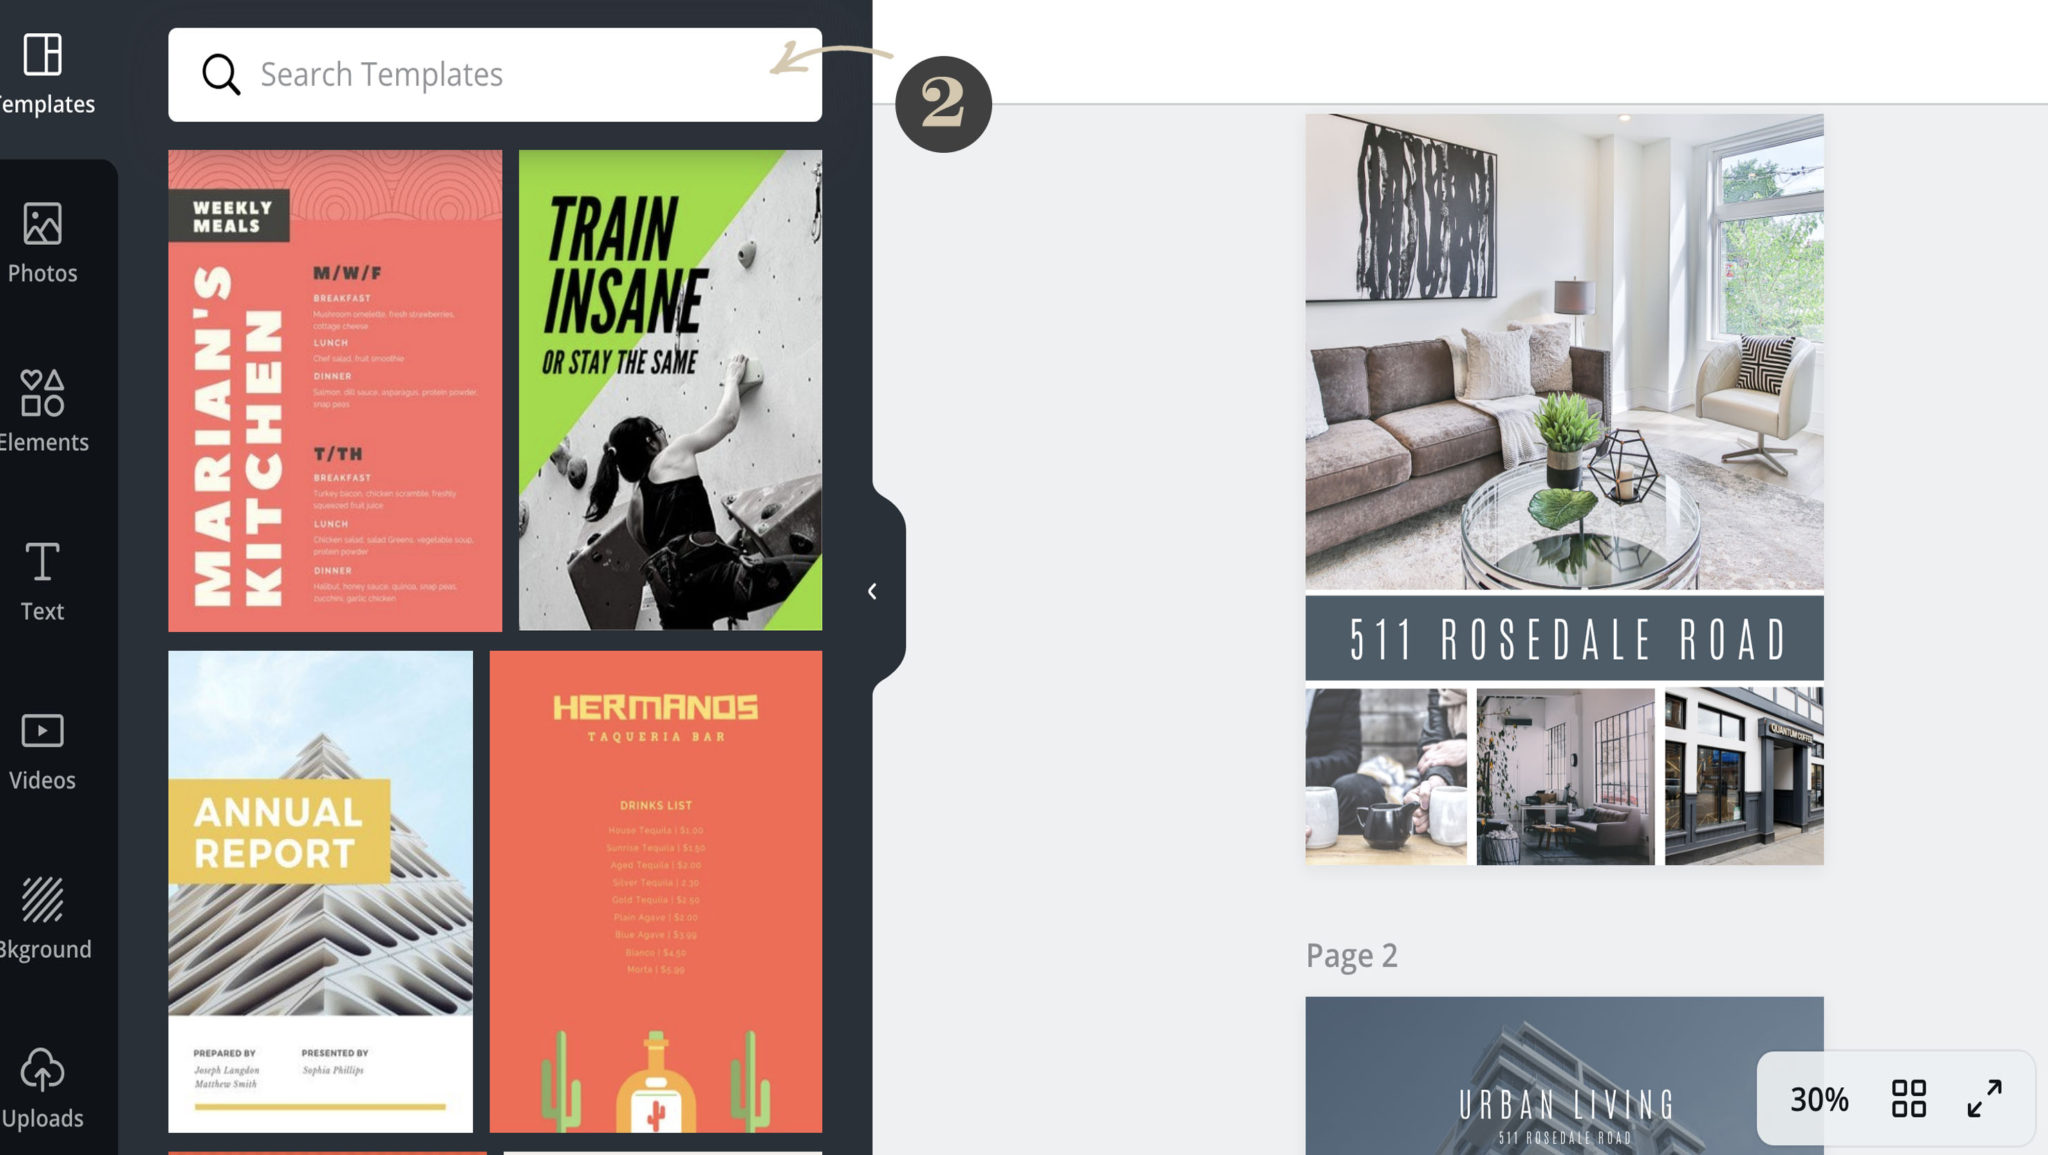 How to Edit Templates in Canva